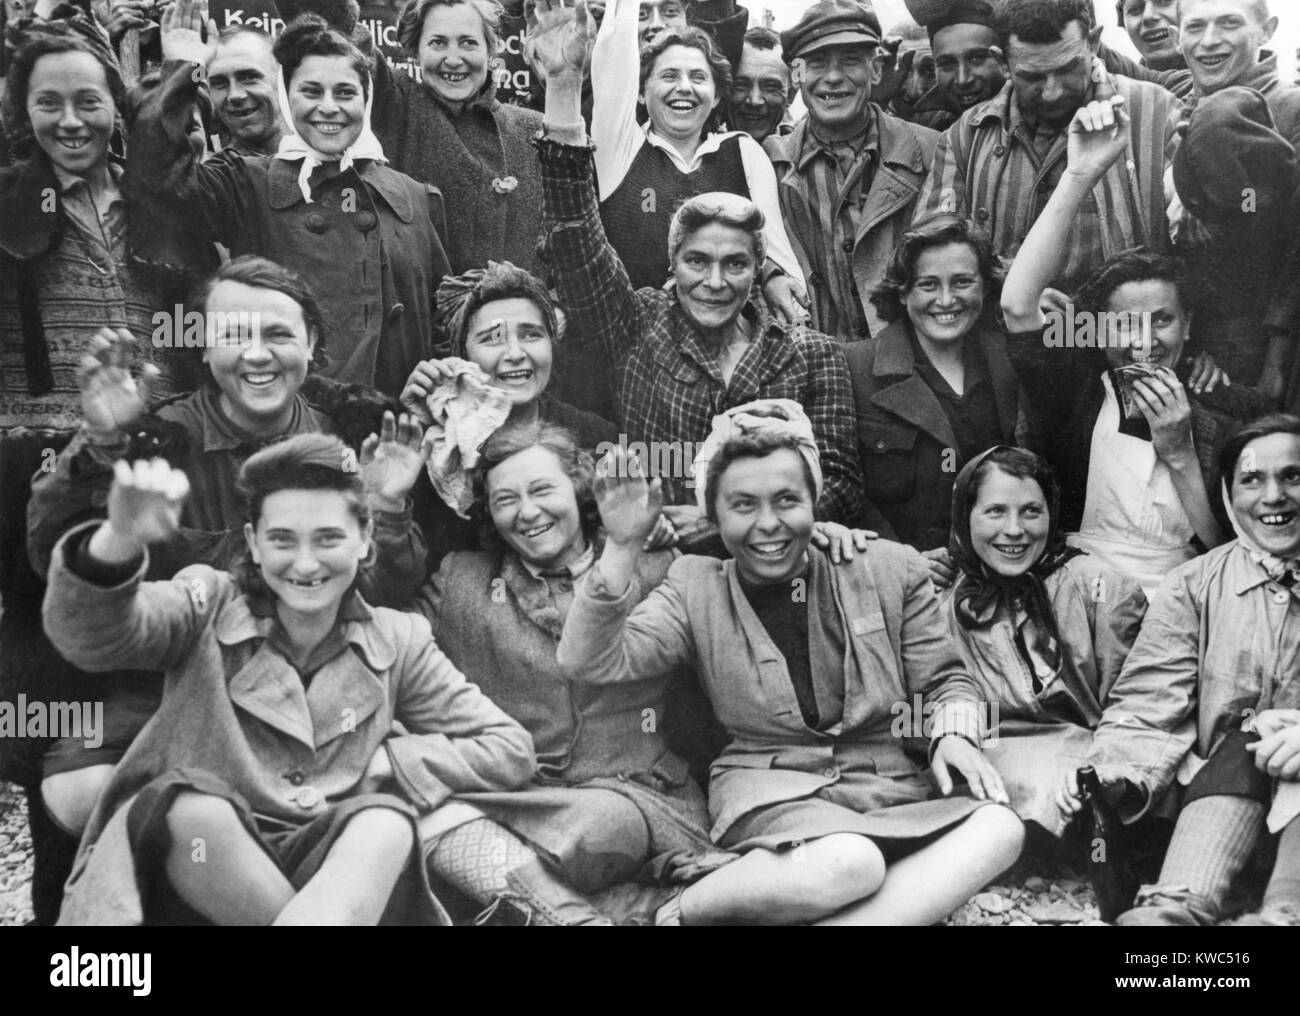 Liberated women prisoners at Dachau Concentration Camp wave and cheer for a group portrait. Photo was taken by U.S. Signal Corps Photographer, ca. April 29, 1945, World War 2 (BSLOC 2015 13 22) Stock Photo